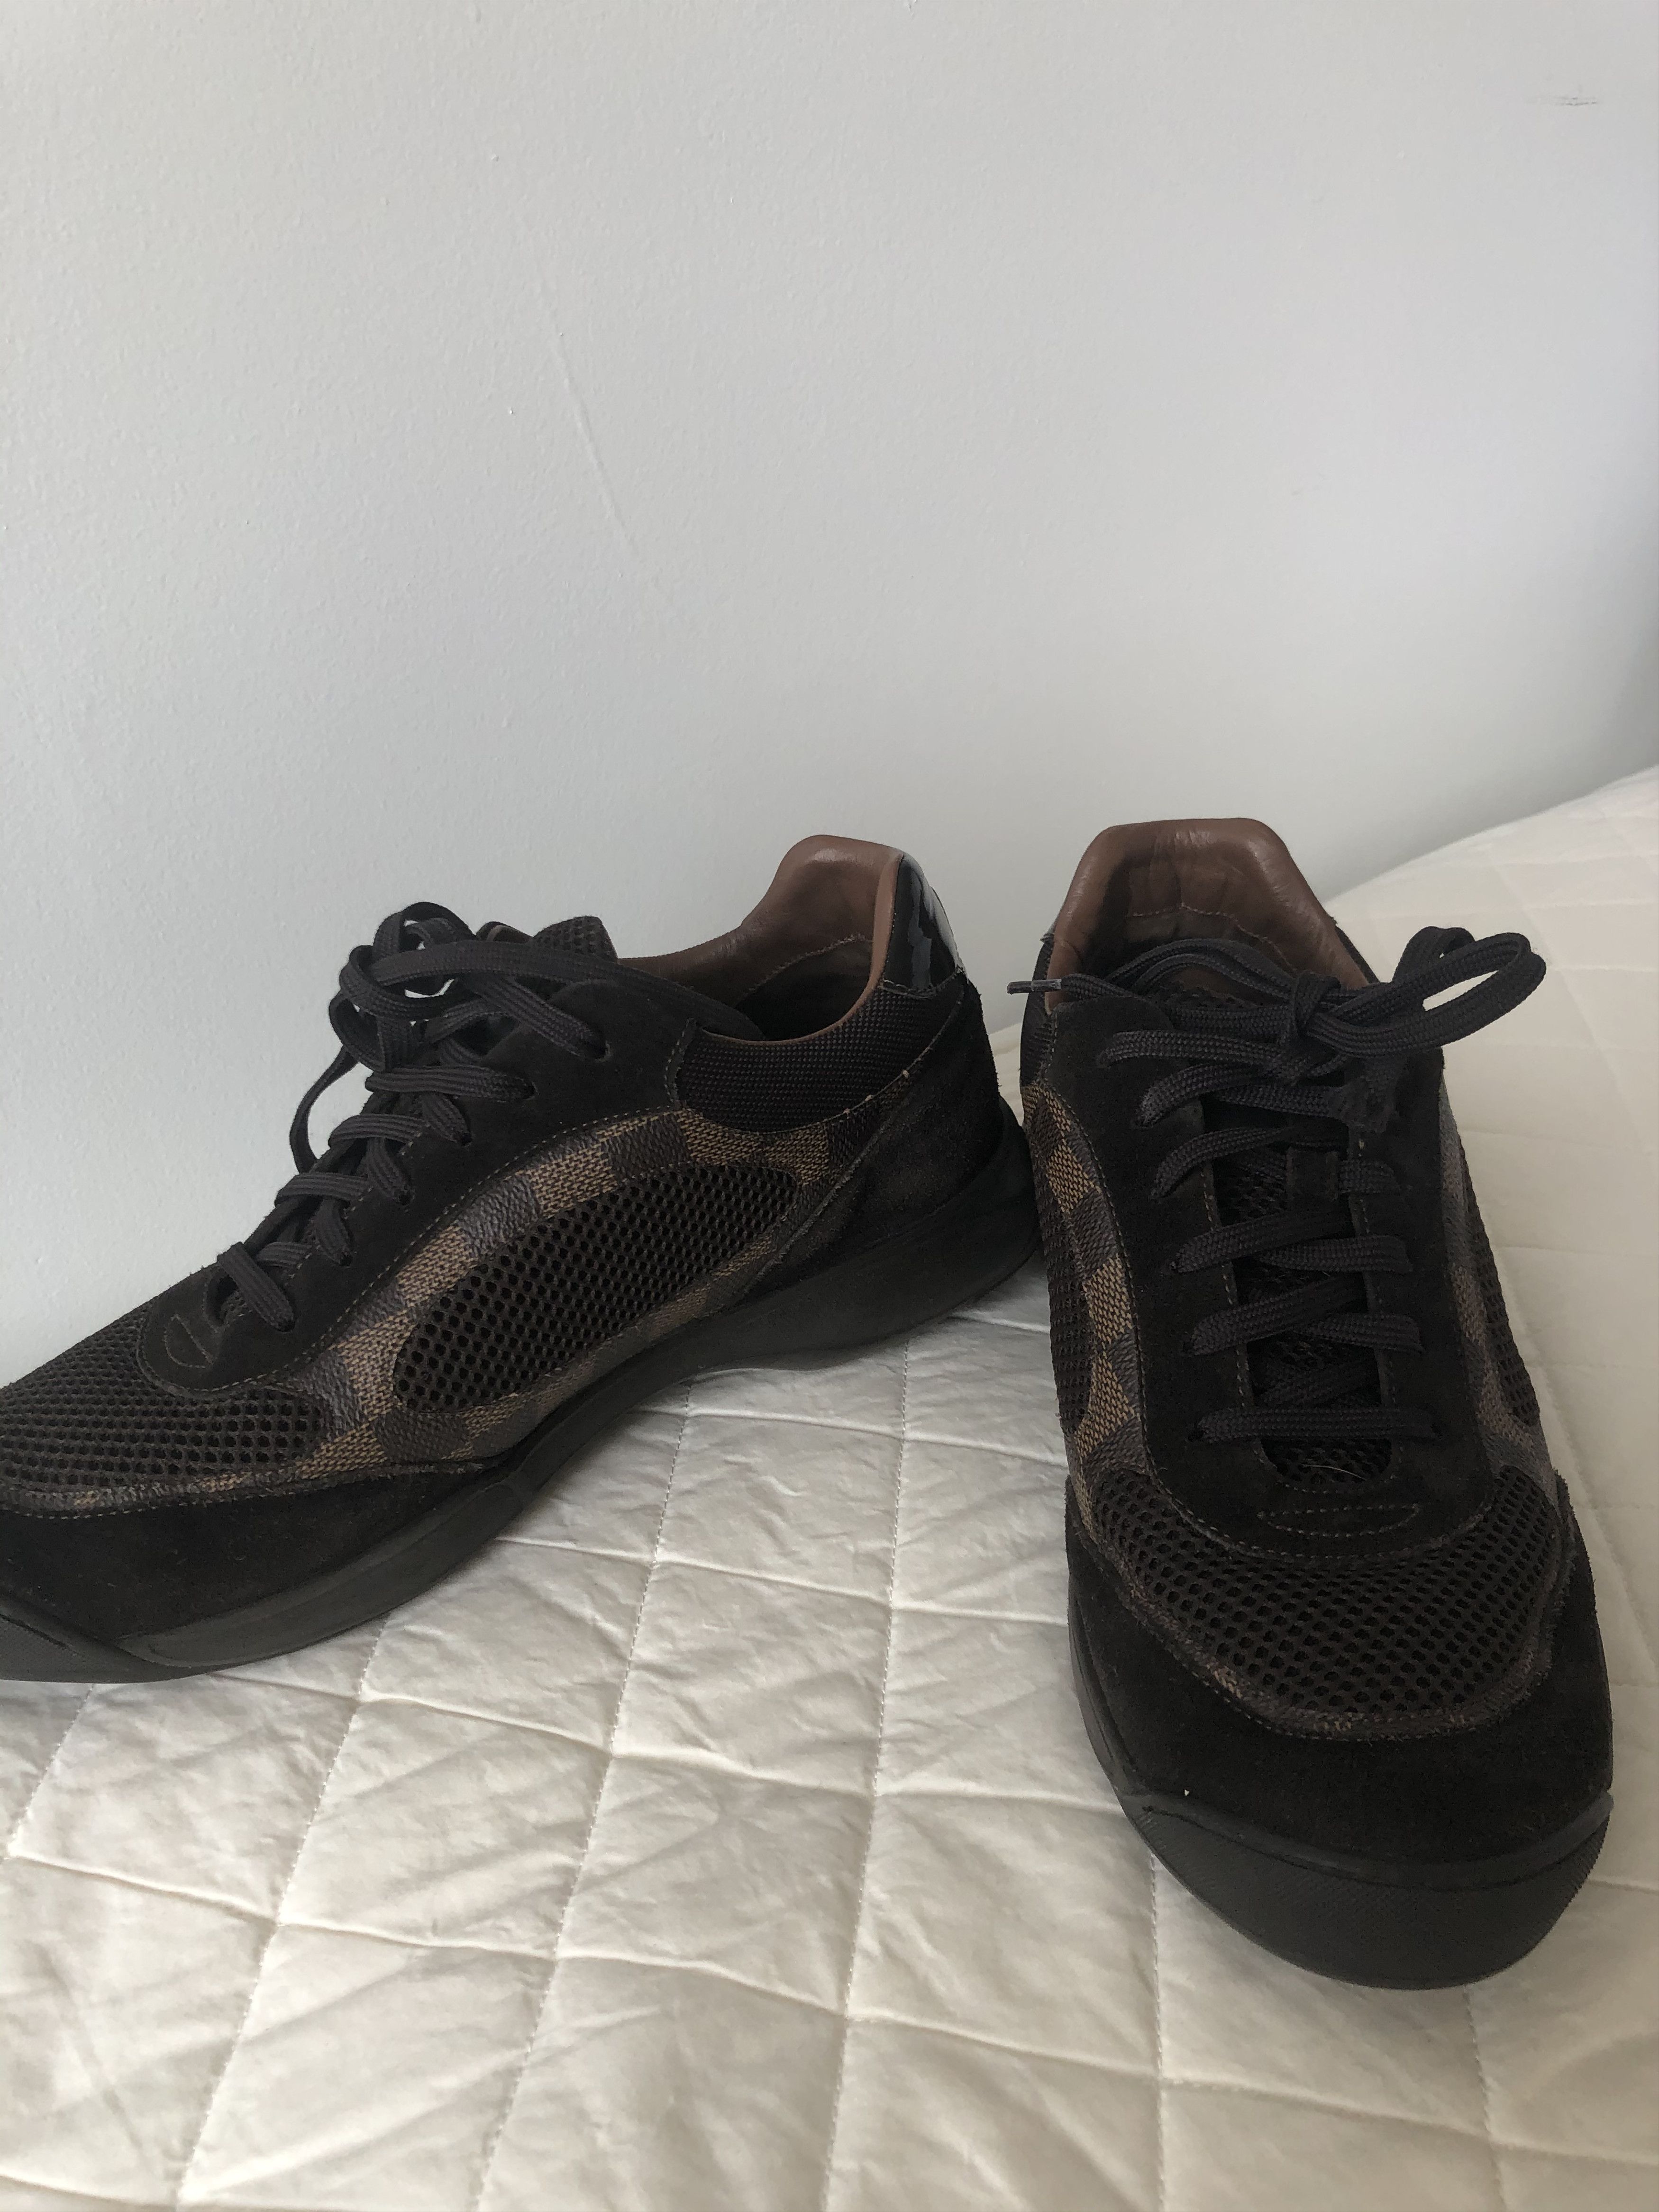 Louis Vuitton Brown Suede and Leather Low tops Size US 7 / EU 40 - 2 Preview